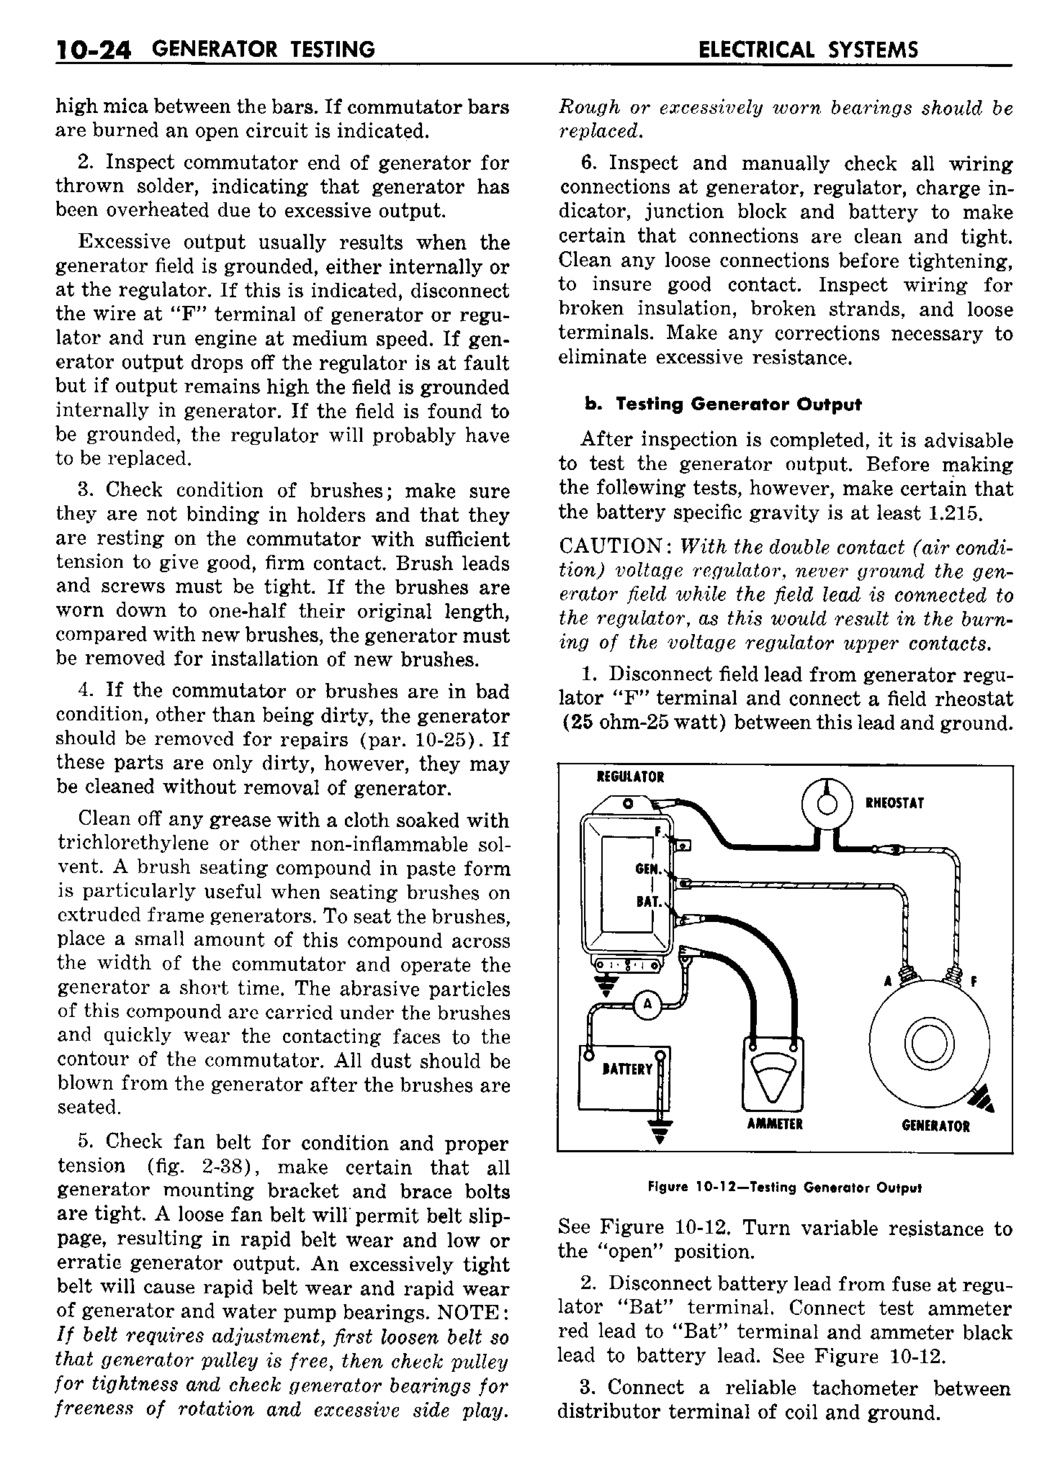 n_11 1960 Buick Shop Manual - Electrical Systems-024-024.jpg